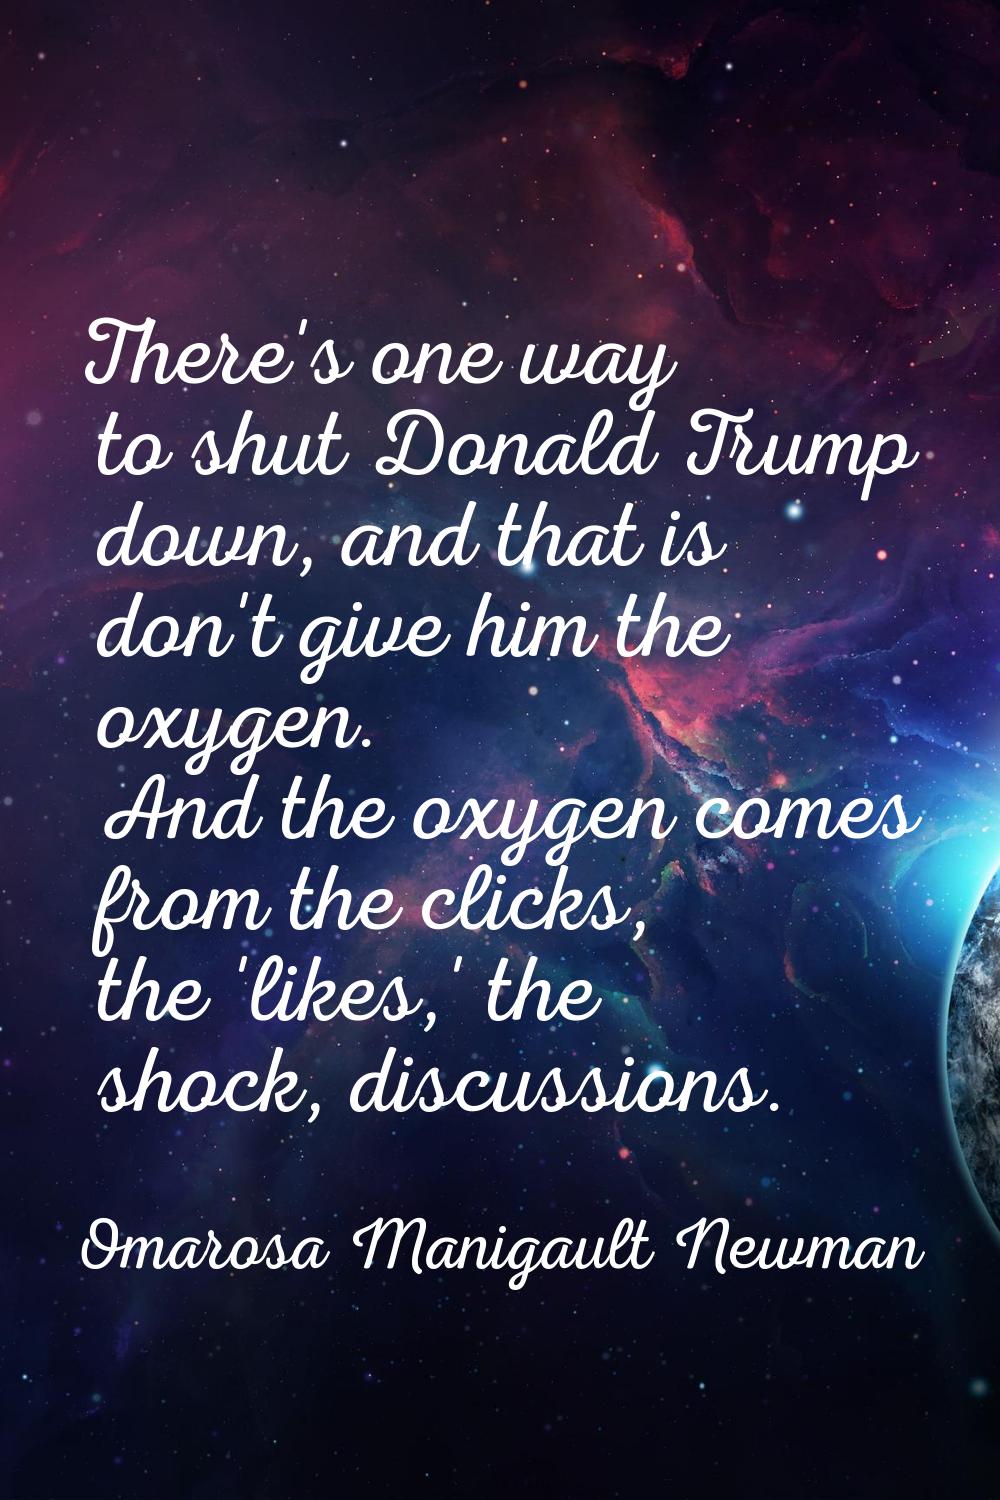 There's one way to shut Donald Trump down, and that is don't give him the oxygen. And the oxygen co